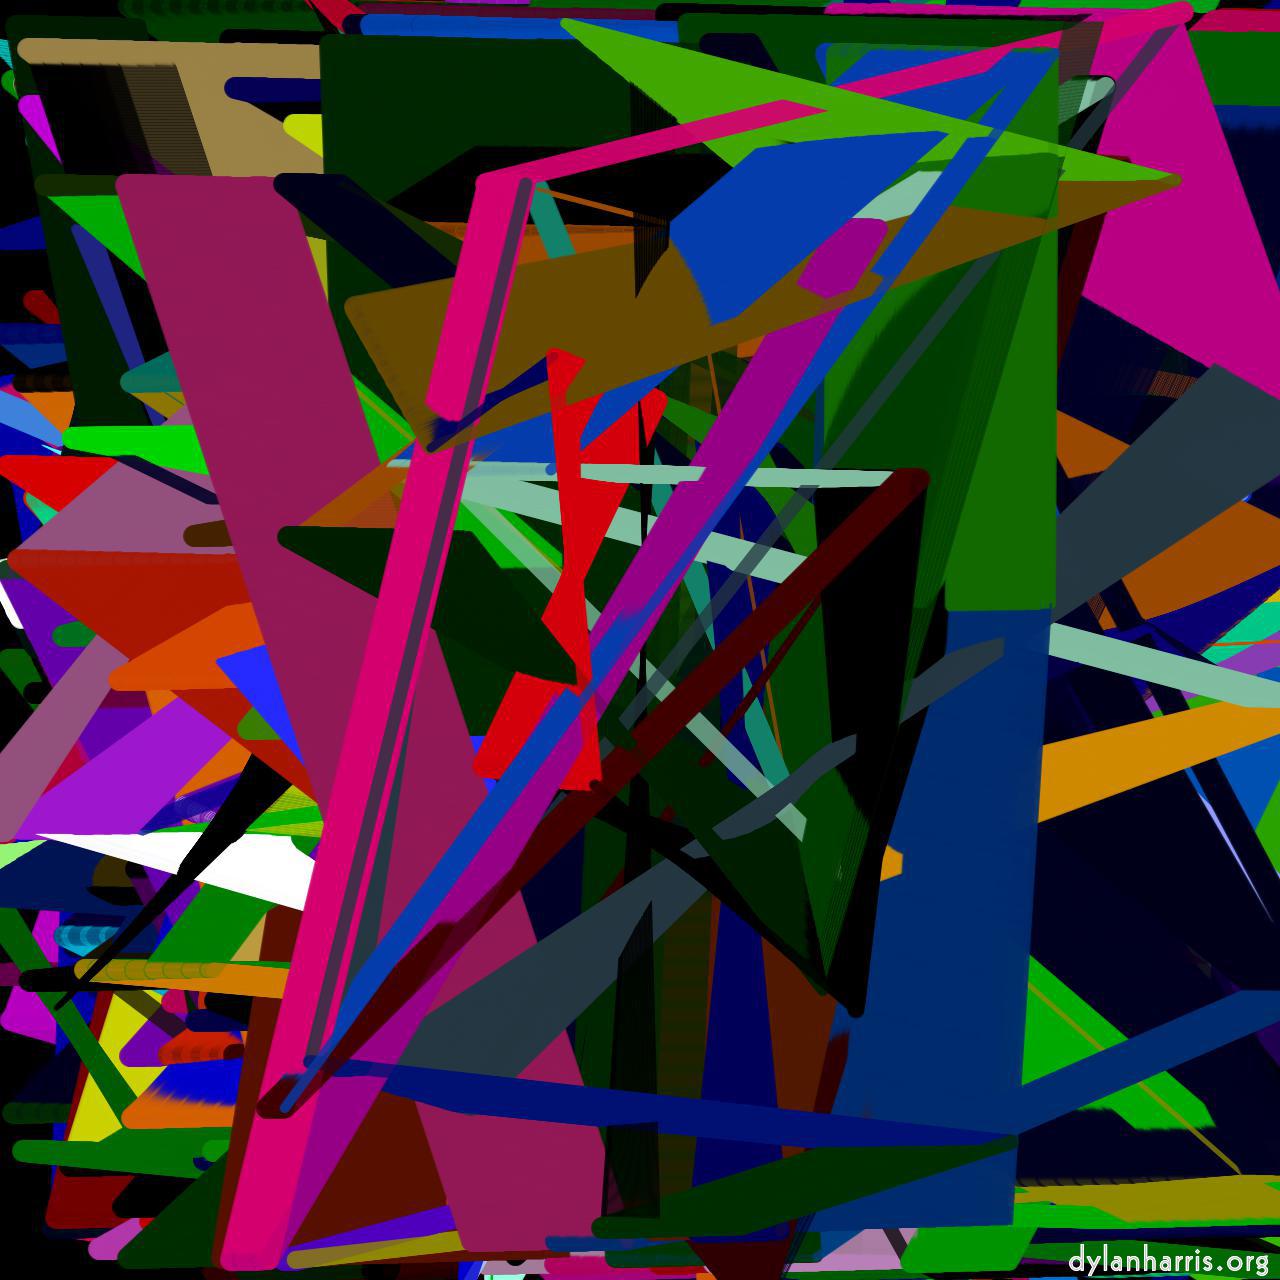 image: animated procedural :: merging triangles